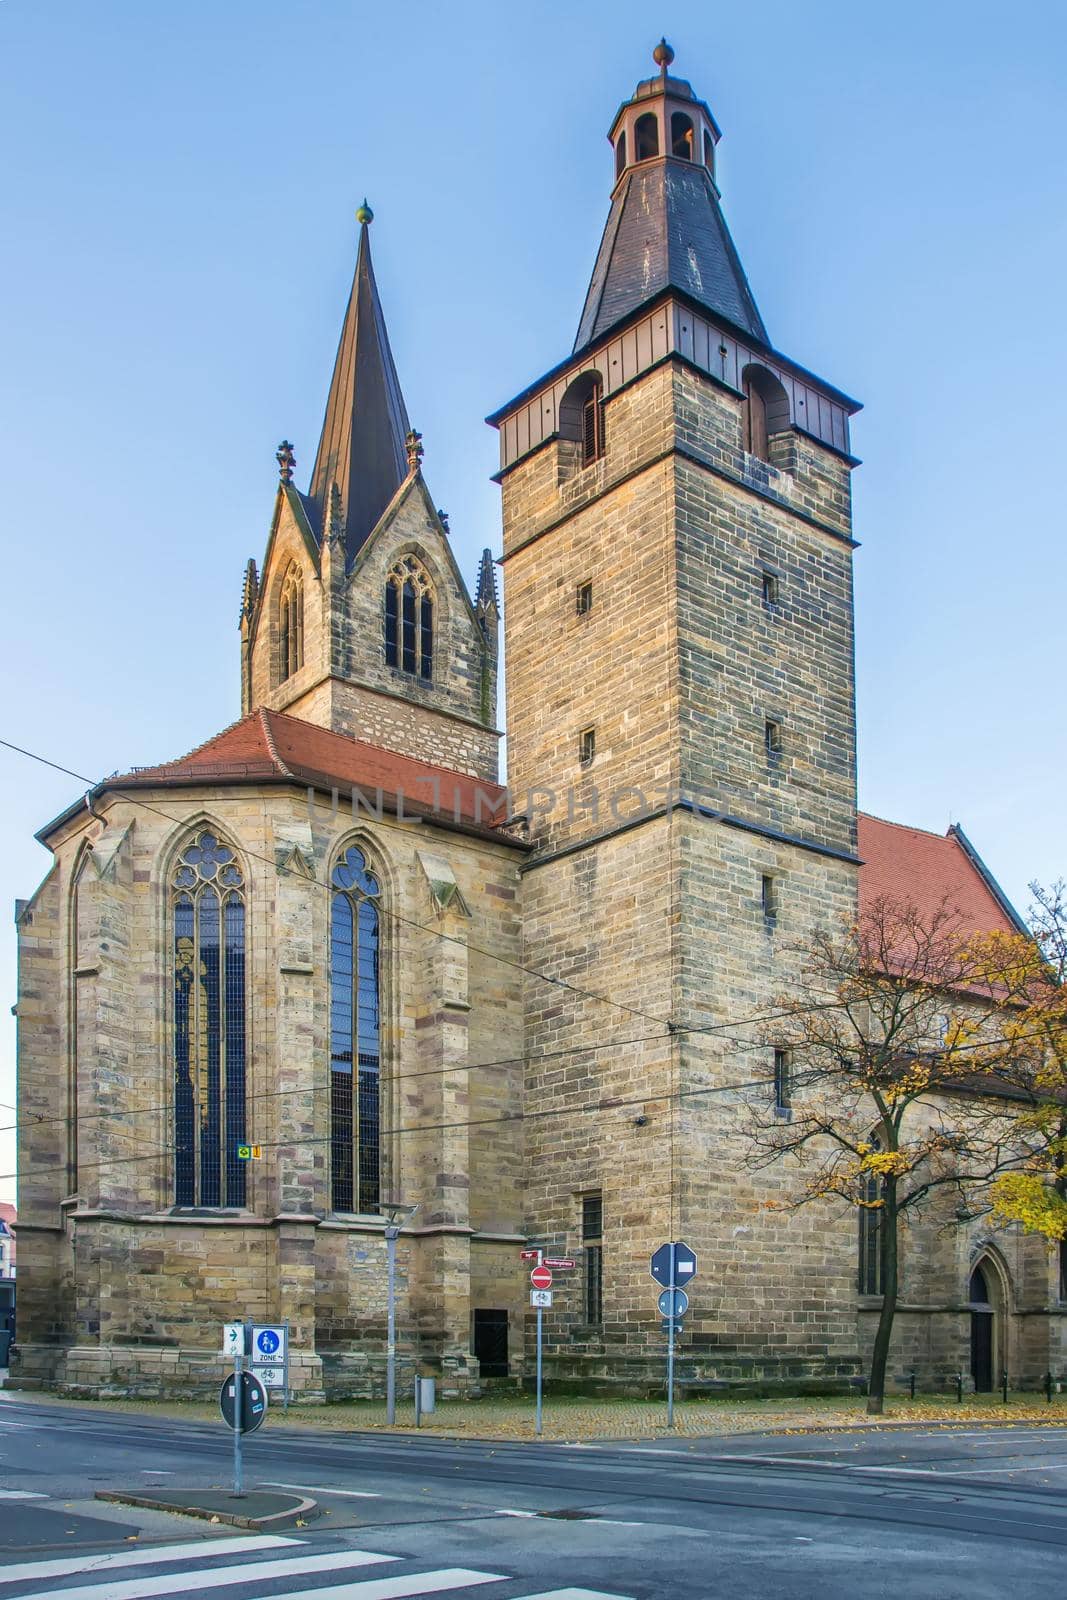 The Kaufmannskirche St. Gregor (Merchant's Church St Gregory) is a 14th-century Gothic parish church at Anger Square in Erfurt, Germany